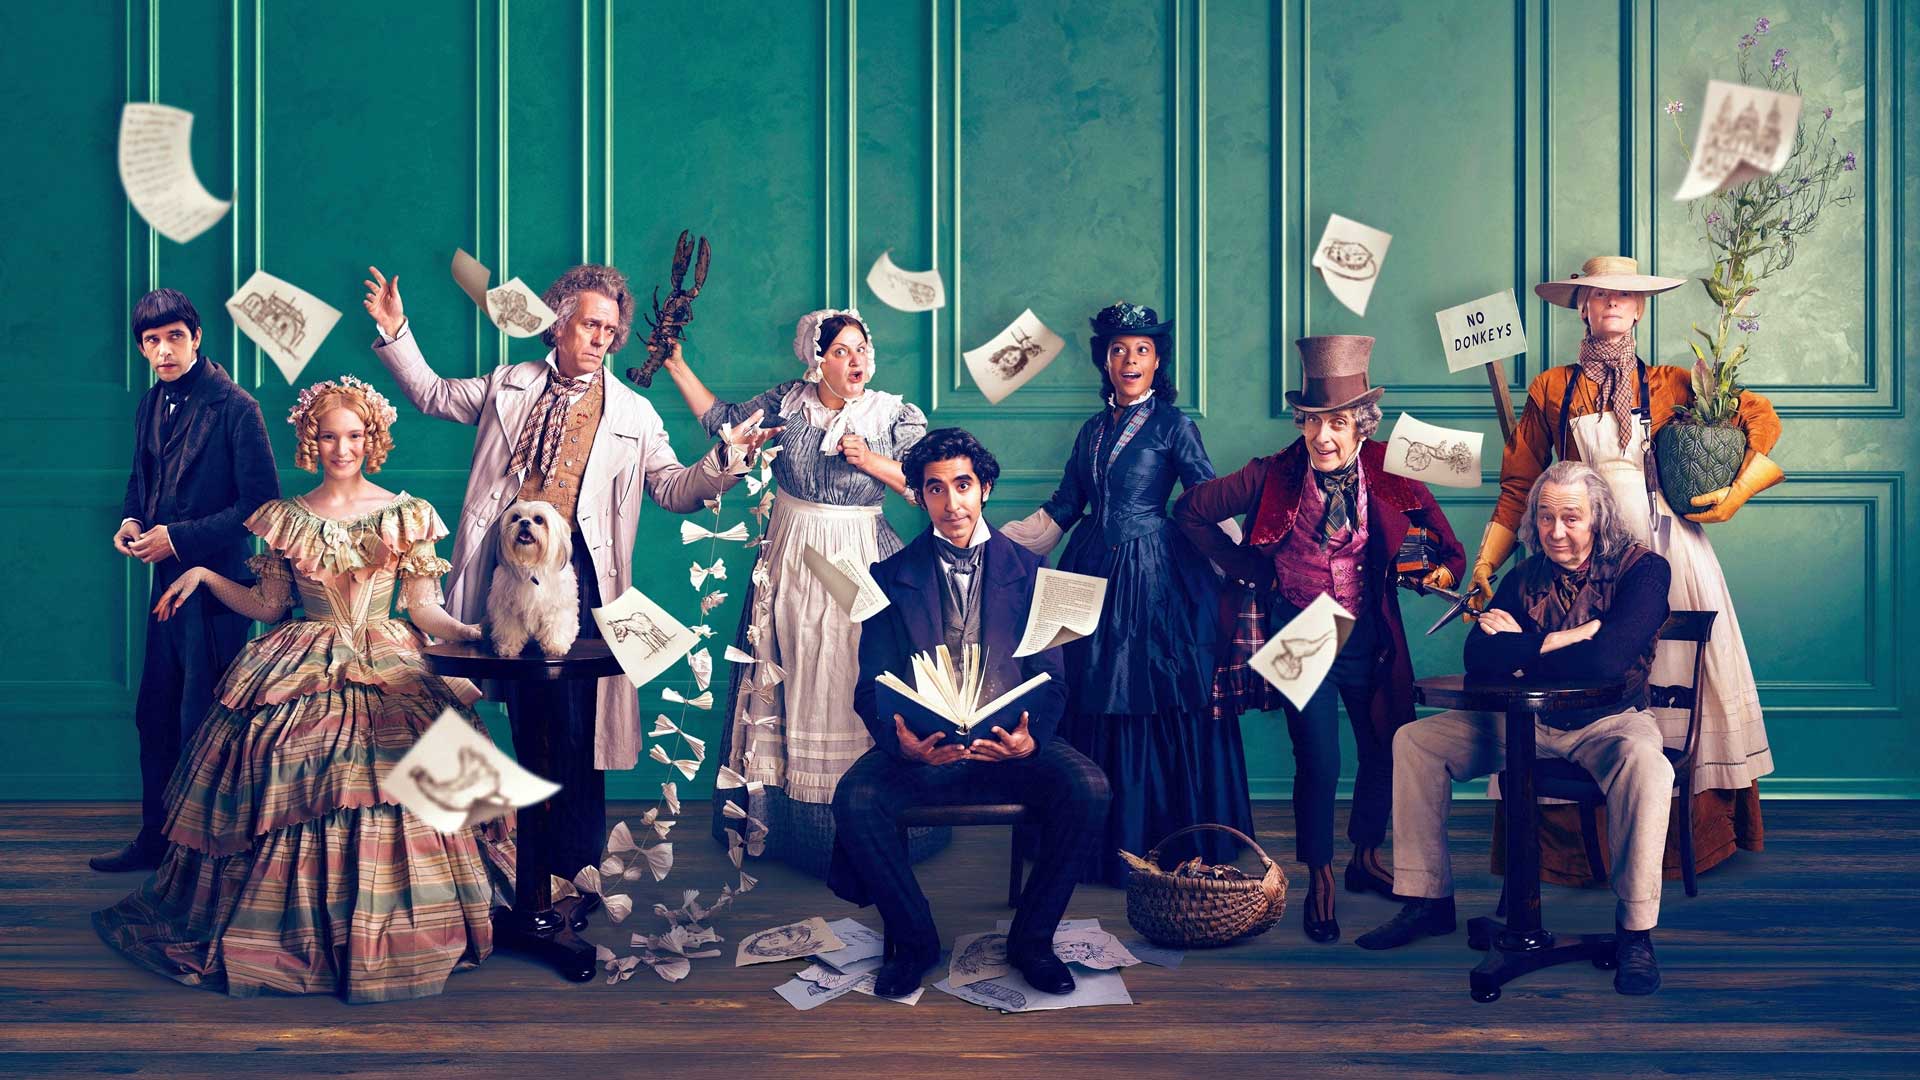 Charming 'The Personal History of David Copperfield' Breathes Life into Classic Dickens Story (Review) Force Five News